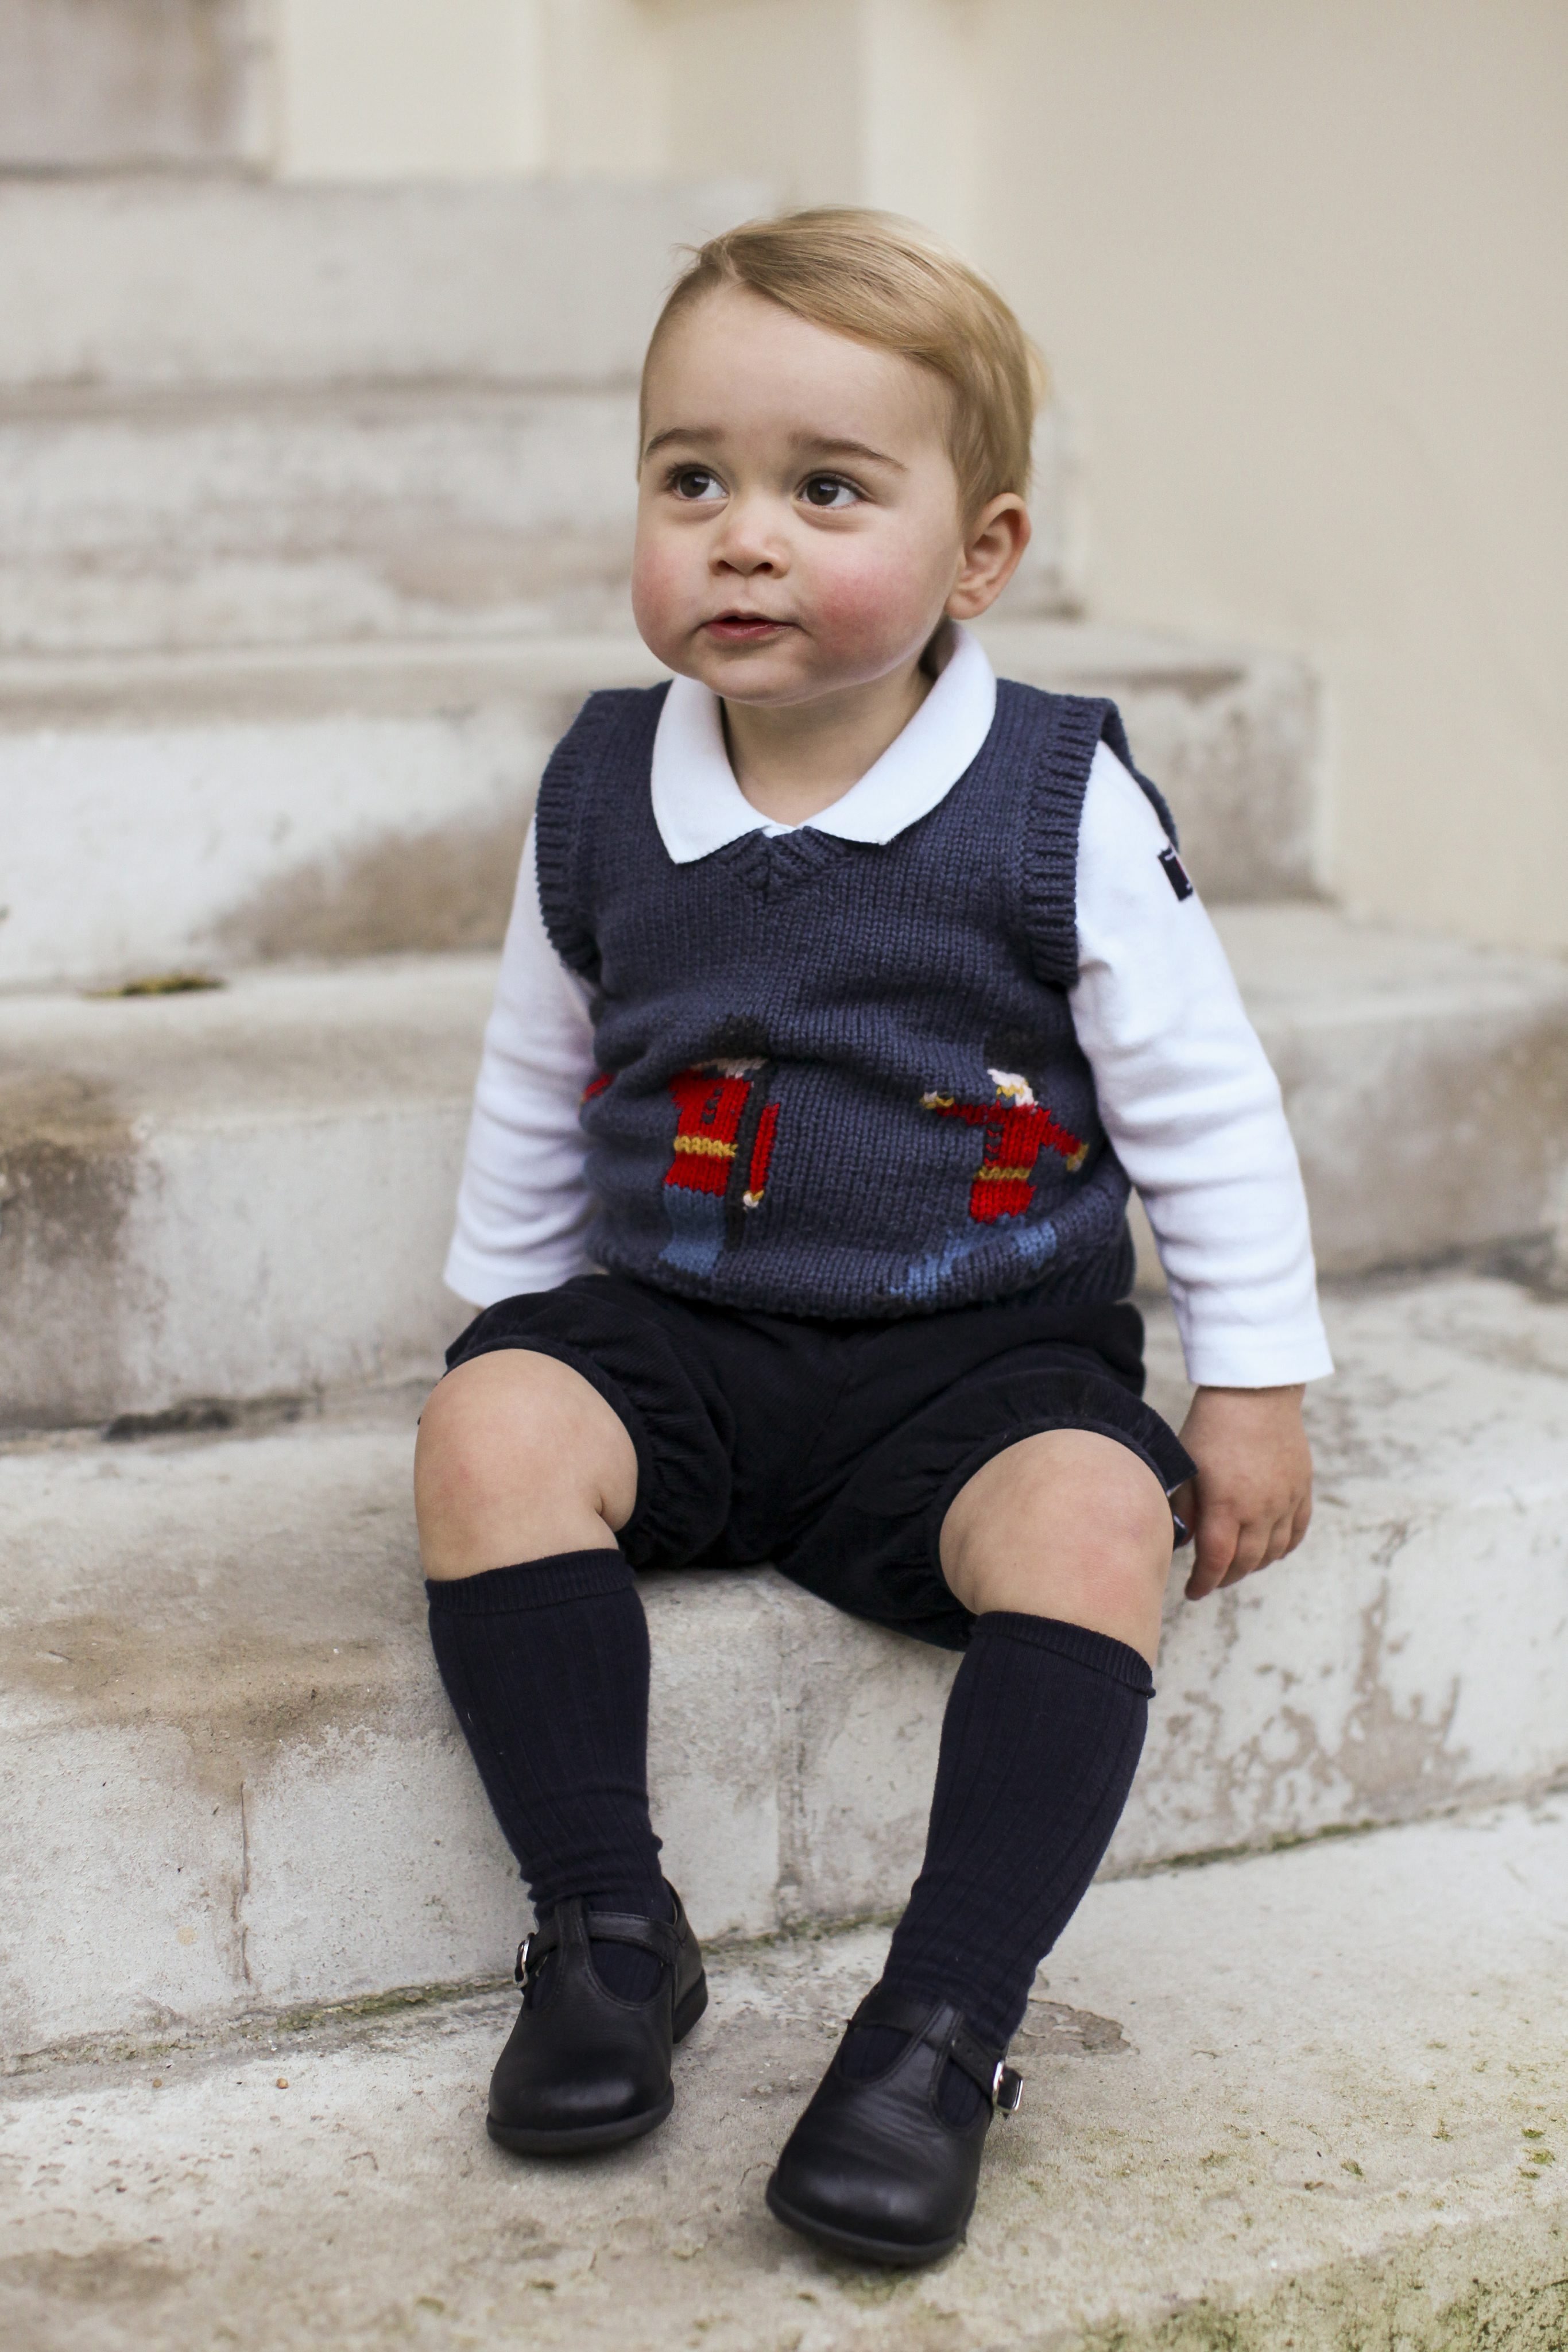 A Christmas photo of Prince George in a courtyard at Kensington Palace, London released on Dec. 13, 2014. (The Duke and Duchess of Cambridge/EPA)